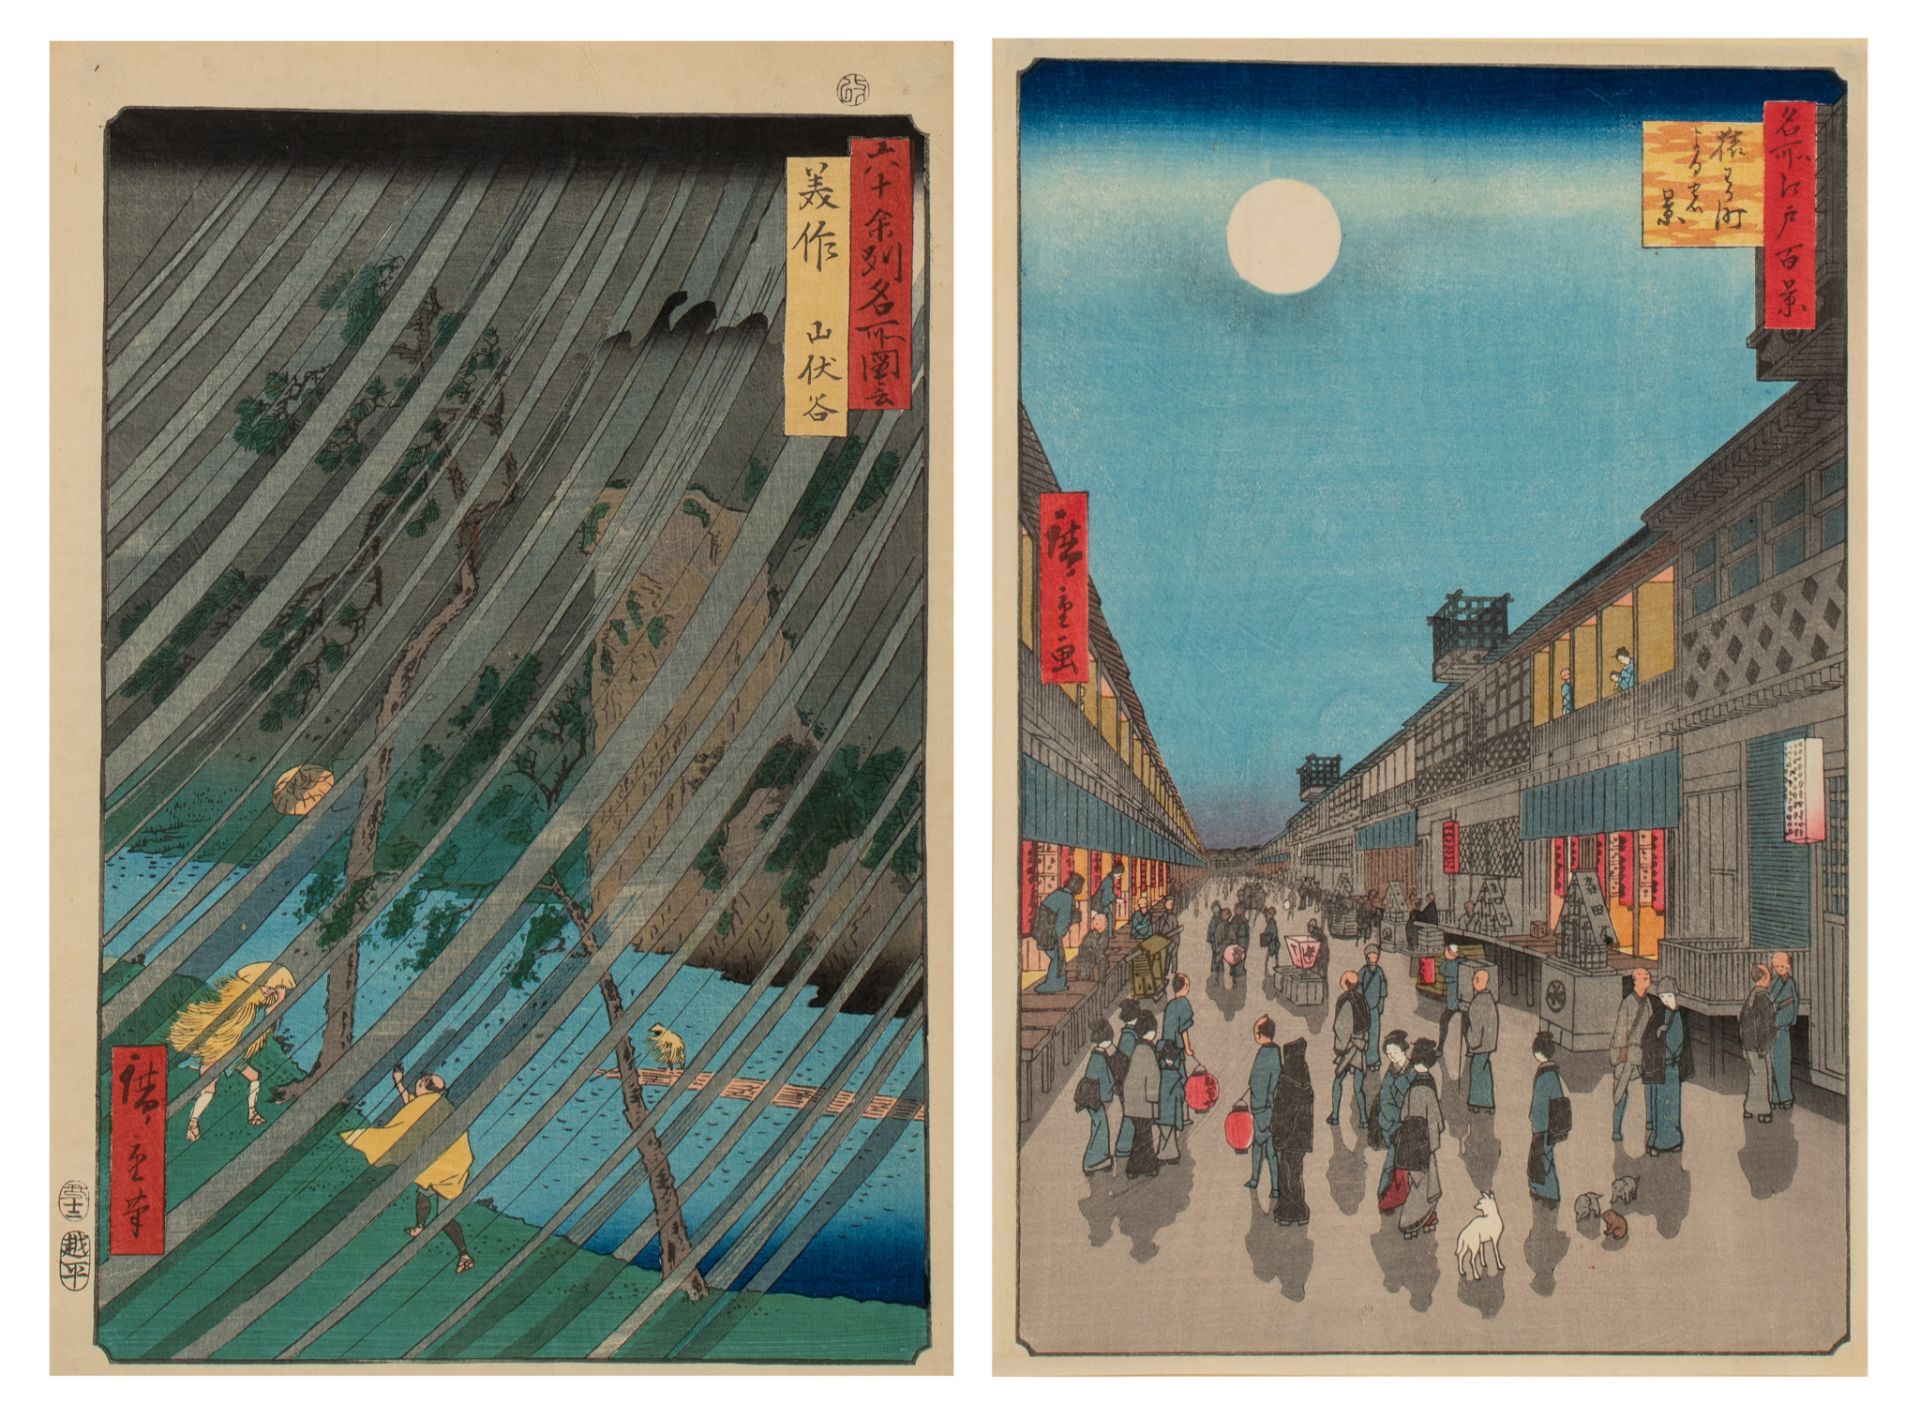 A Japanese woodblock print by Hiroshige, from the series "the famous 100 views of Edo", no. 90 night